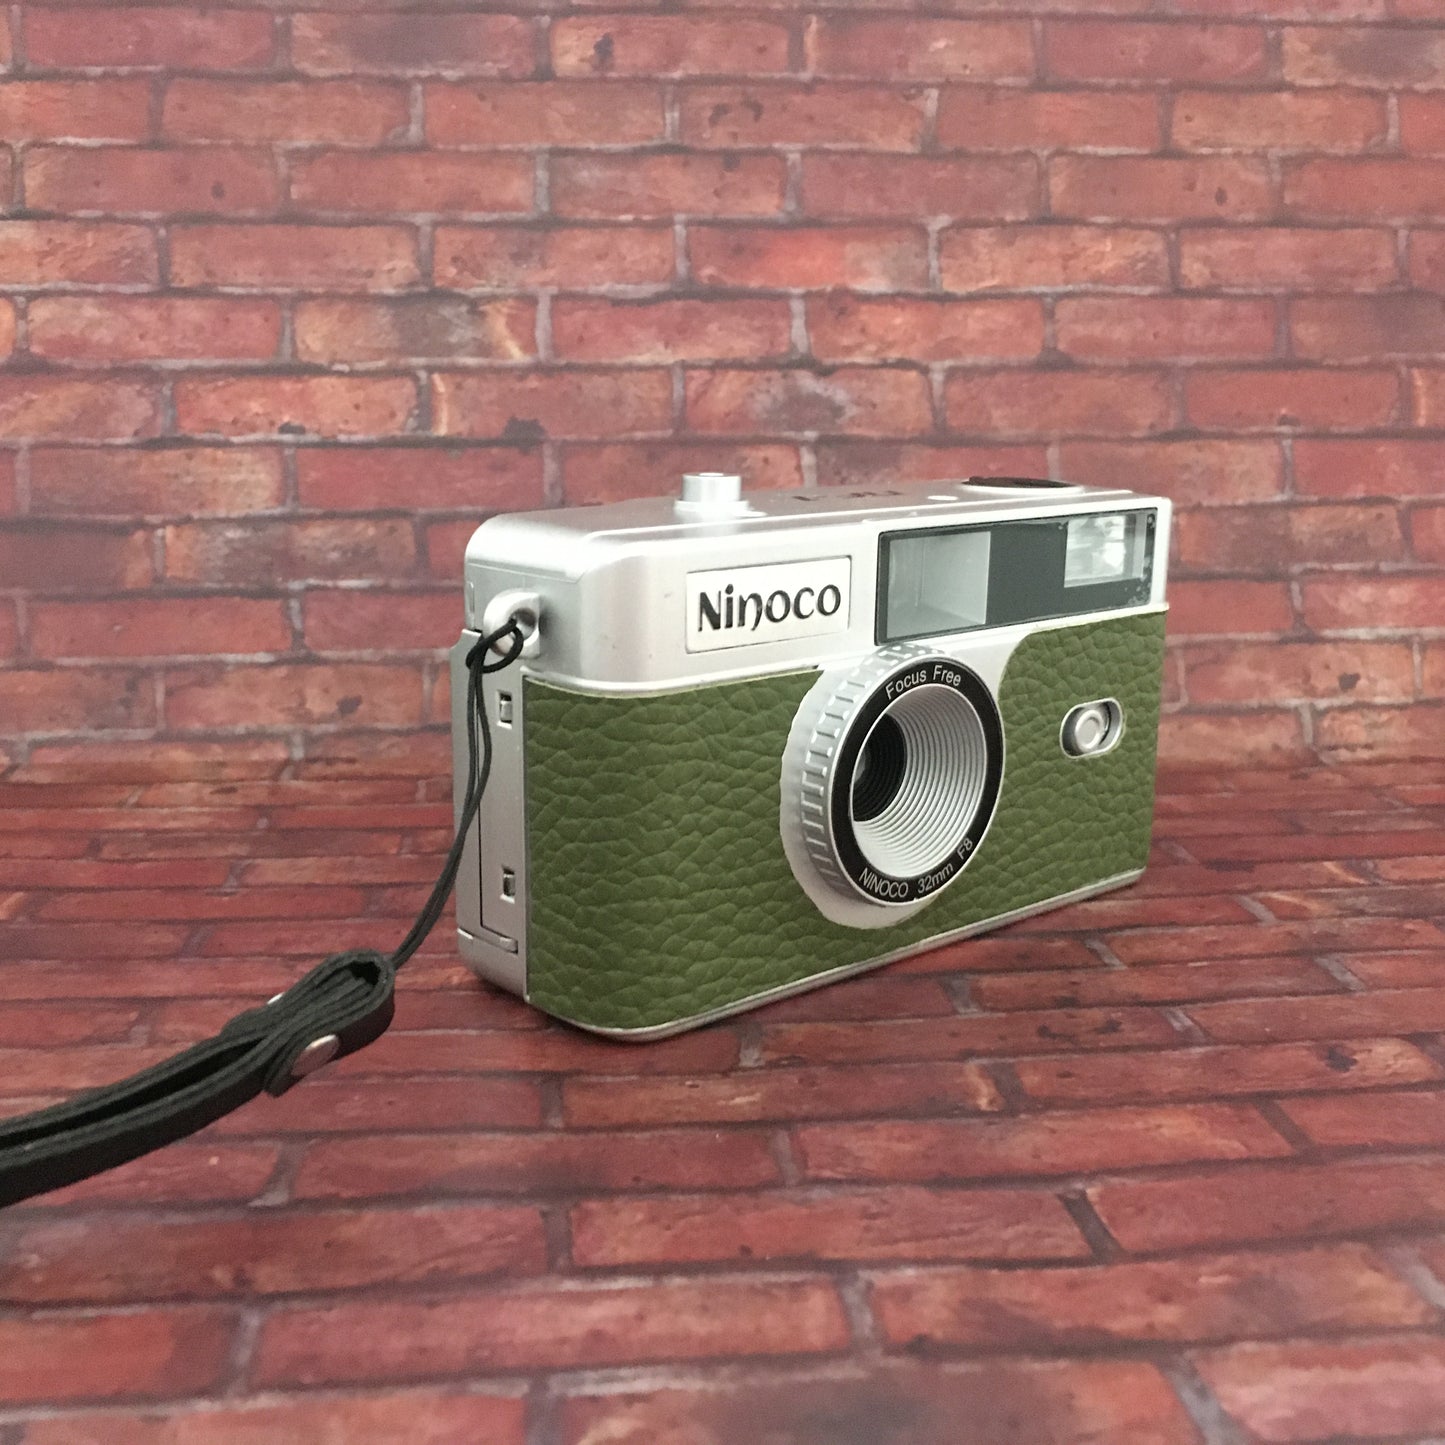 Point & shoot ! Brand new 35mm film camera with matcha green leather